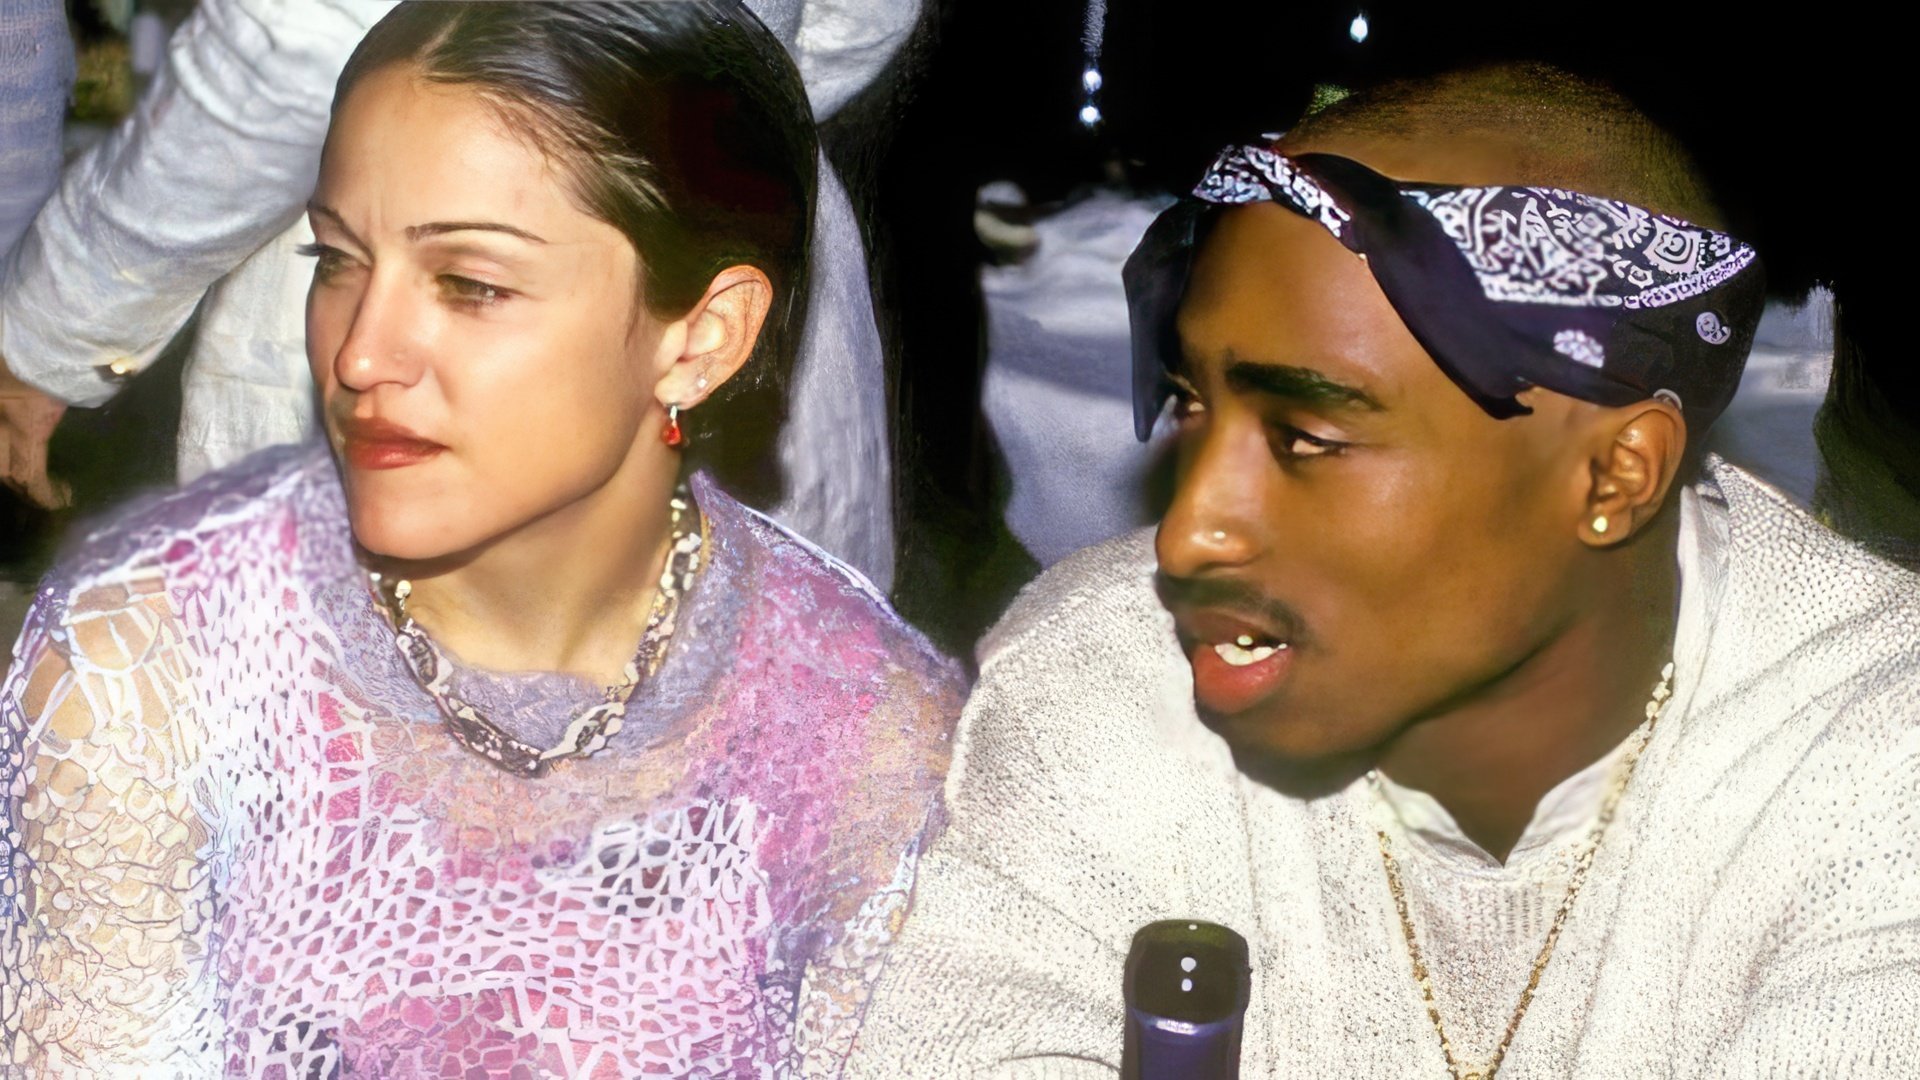 Madonna dated Tupac. In 1996, the rapper was shot